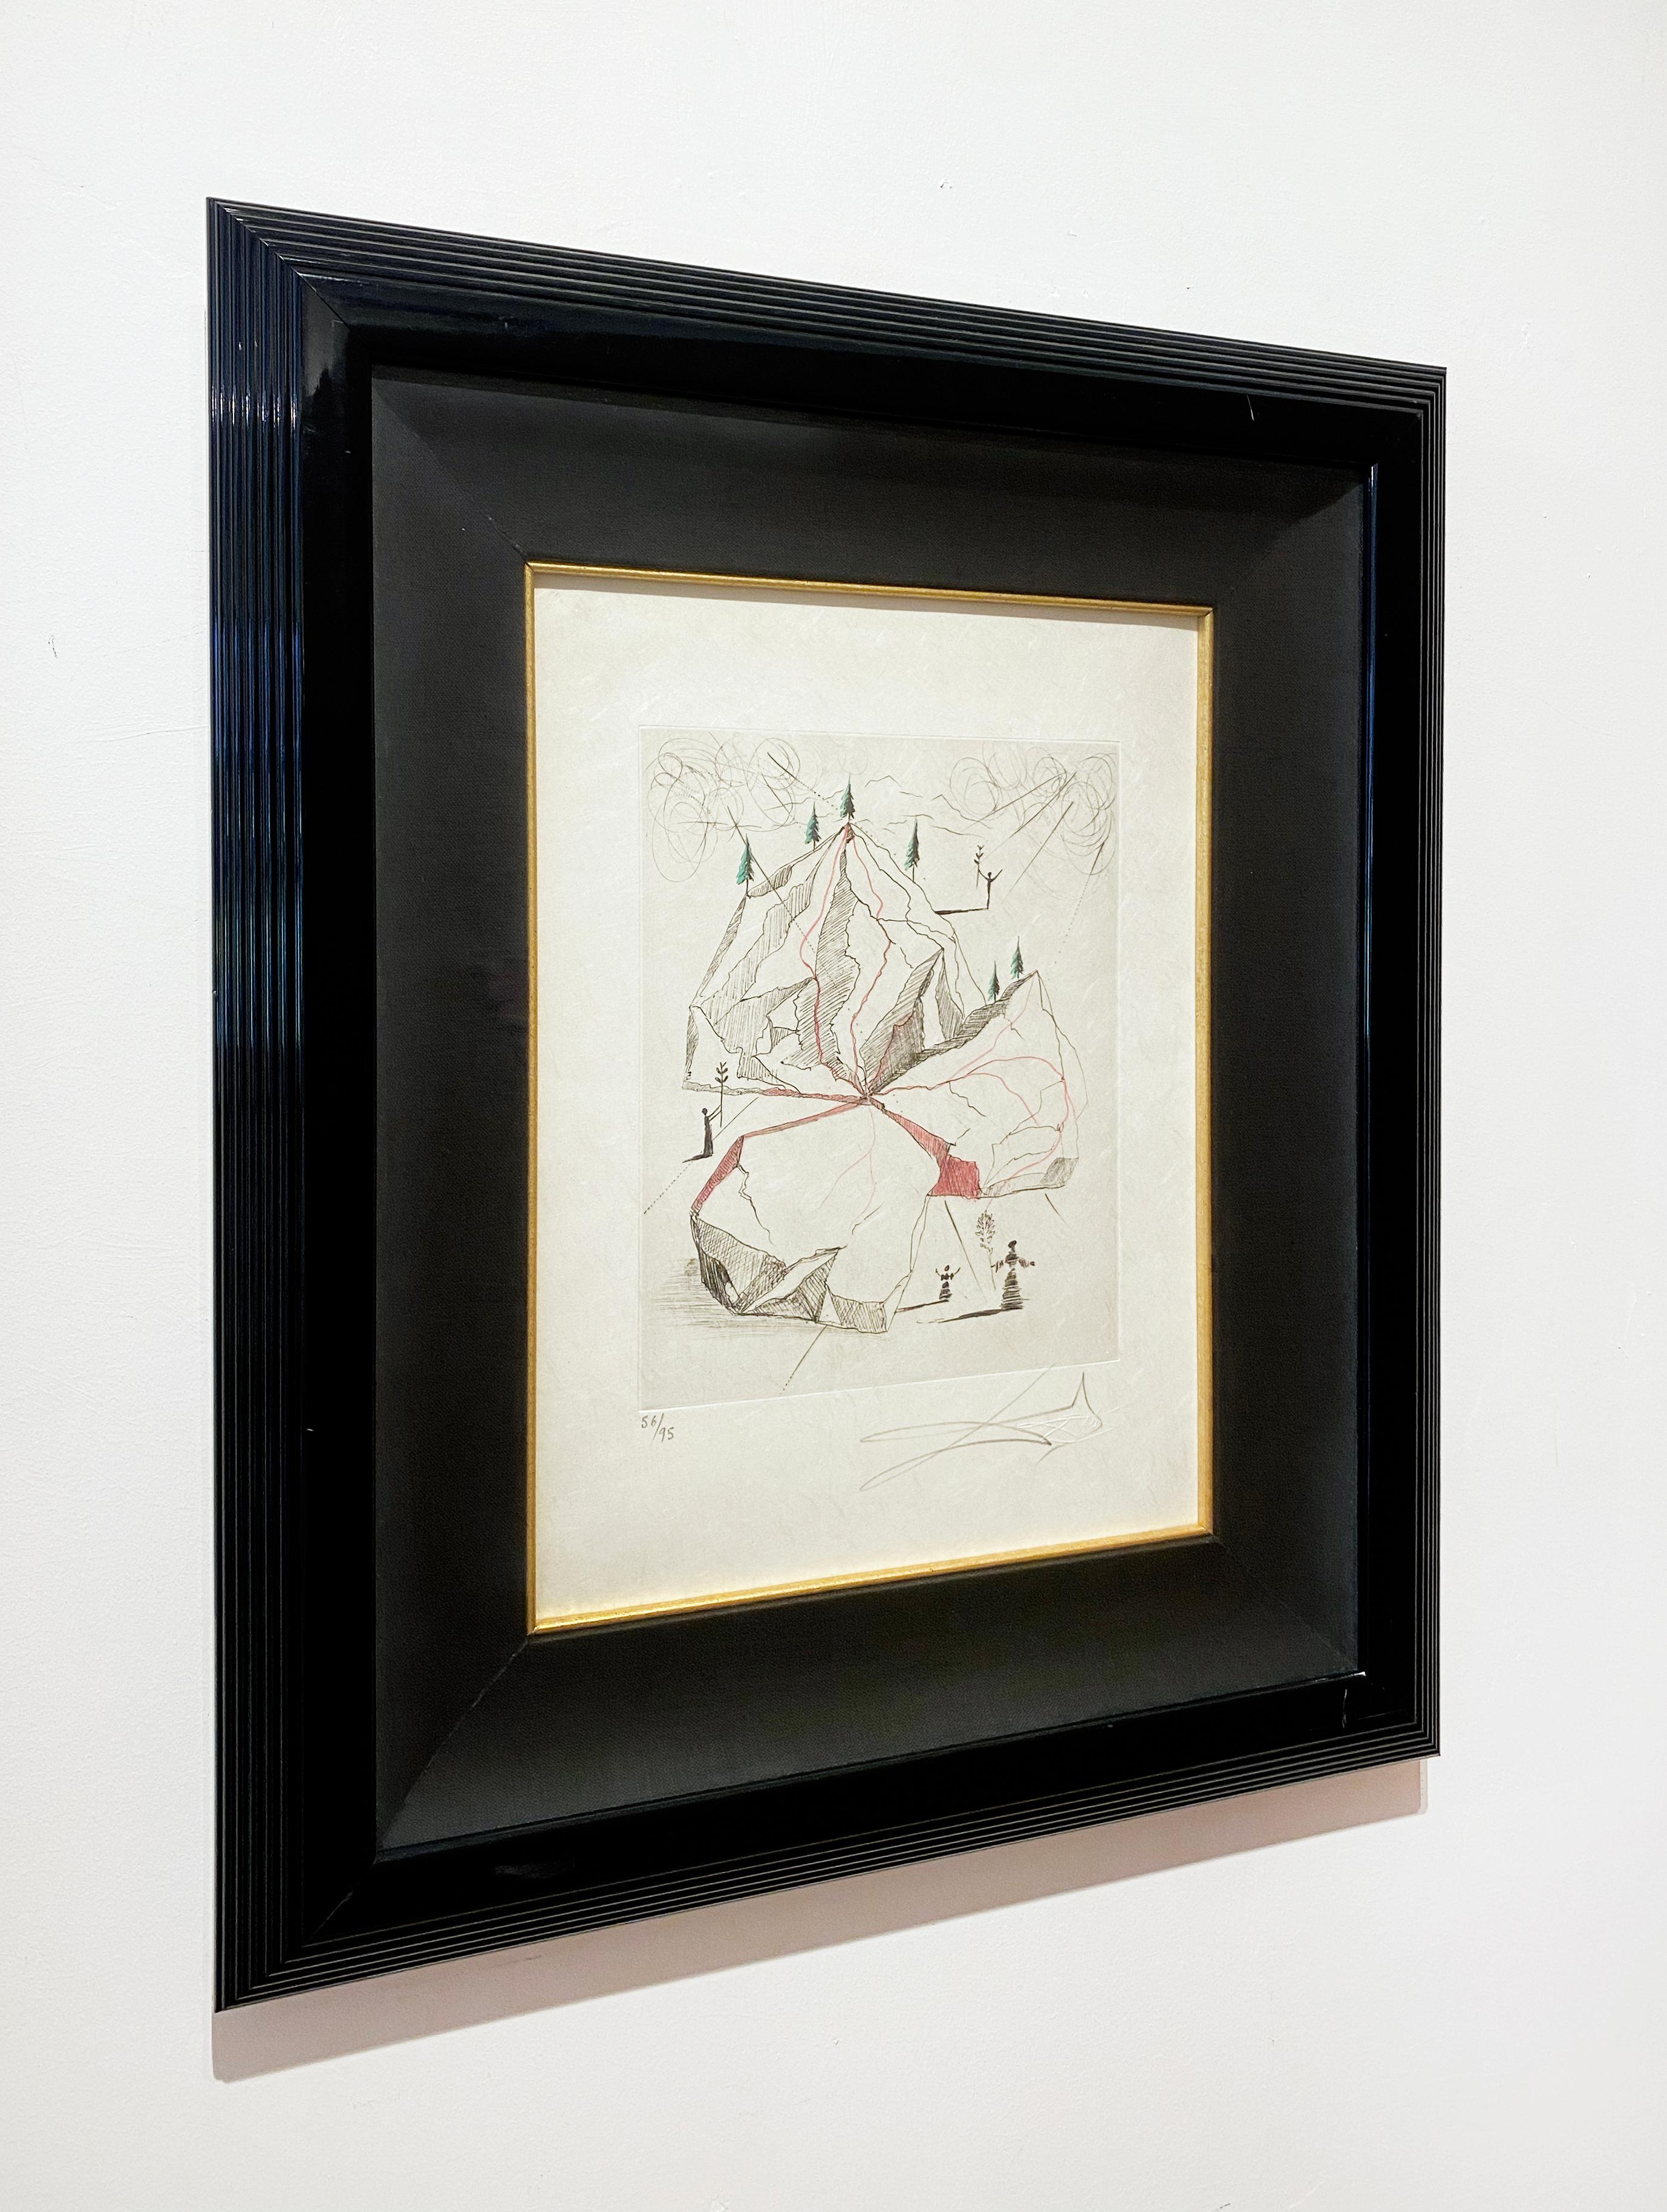 Artist:  Dali, Salvador
Title:  Mountain of Peace
Series:  Poems de Mao-Tse-Tung
Medium:  Etching on  Japon Paper
Framed Dimensions:  22